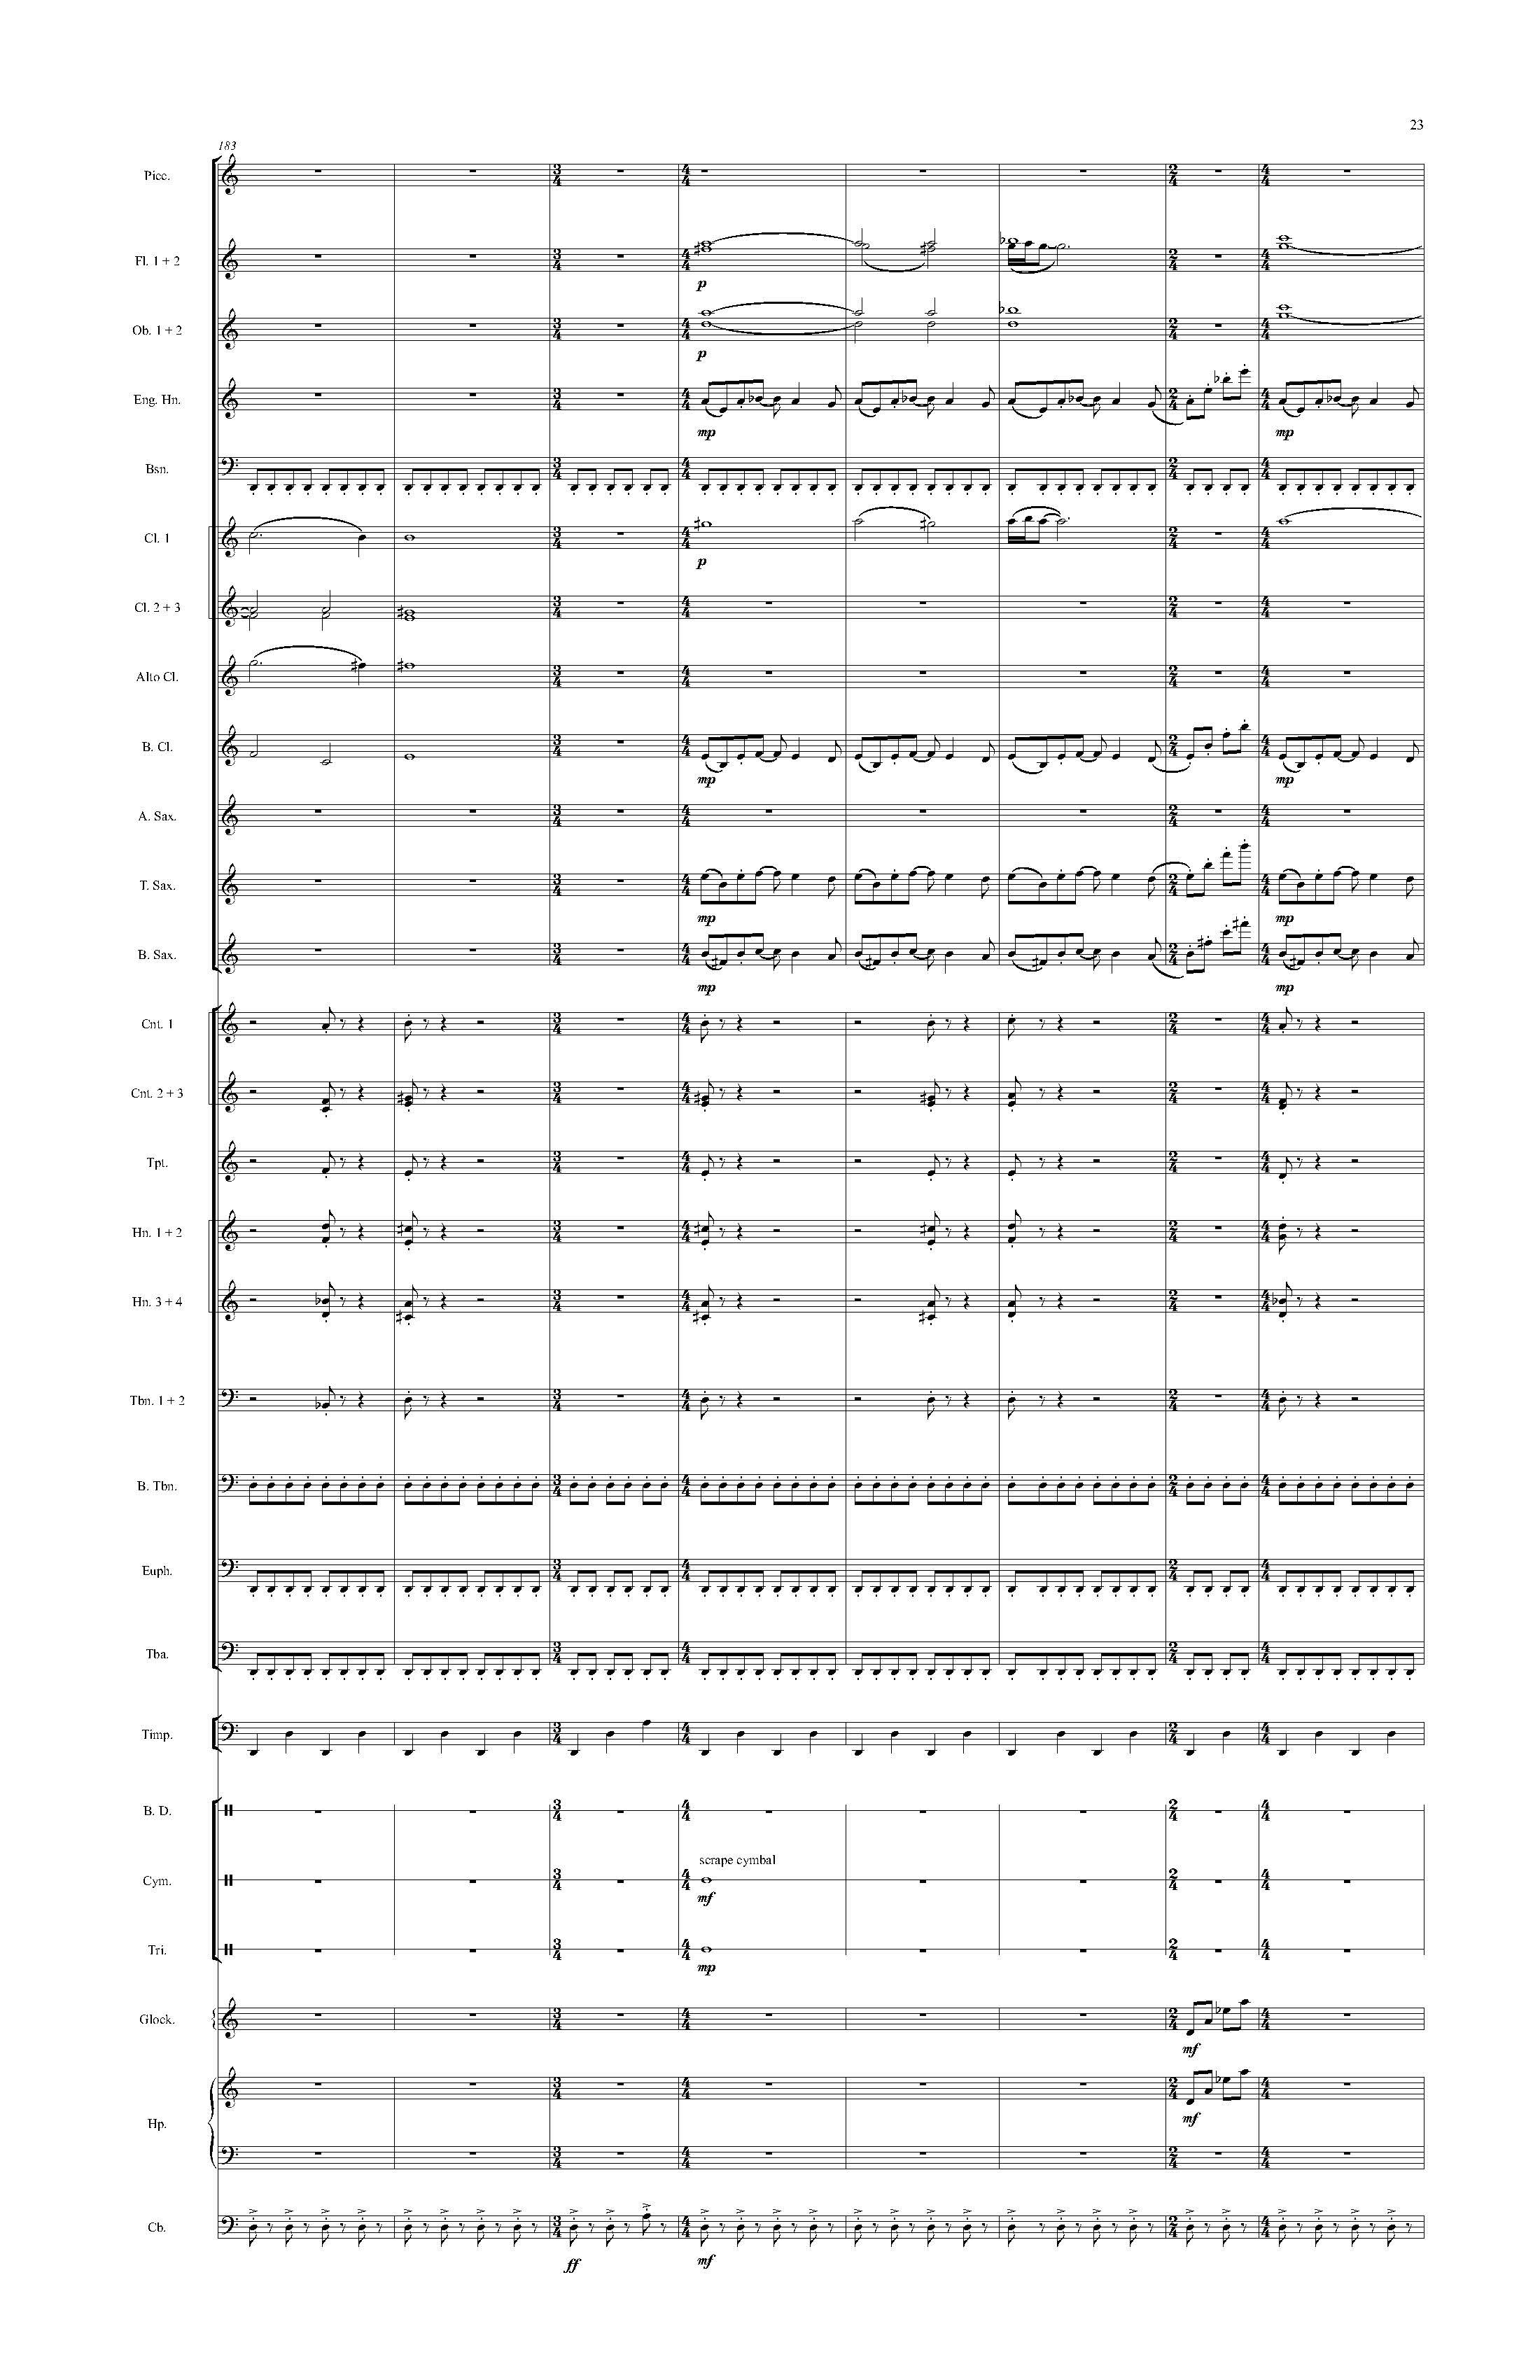 Psyche - Complete Score_Page_29.jpg